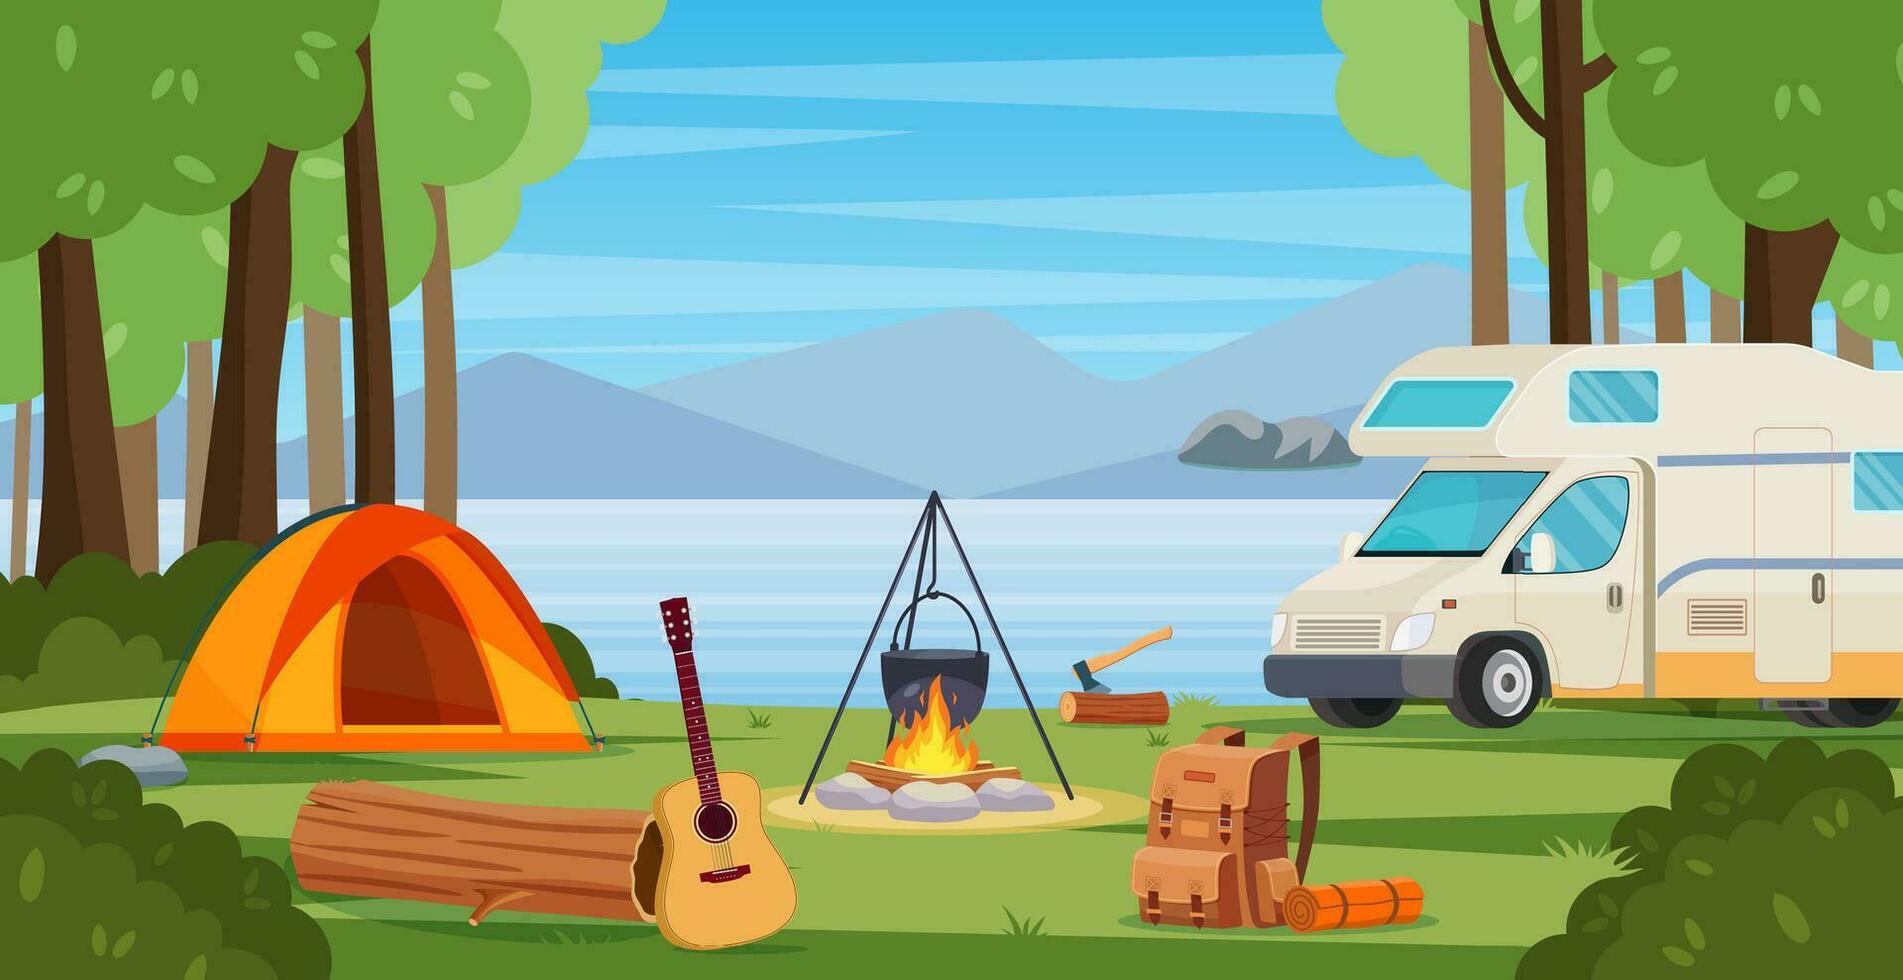 Summer camp in forest with bonfire, tent, van,backpack and lantern. cartoon landscape with mountain, forest and campsite. Equipment for travel, hiking. Vector illustration in flat style